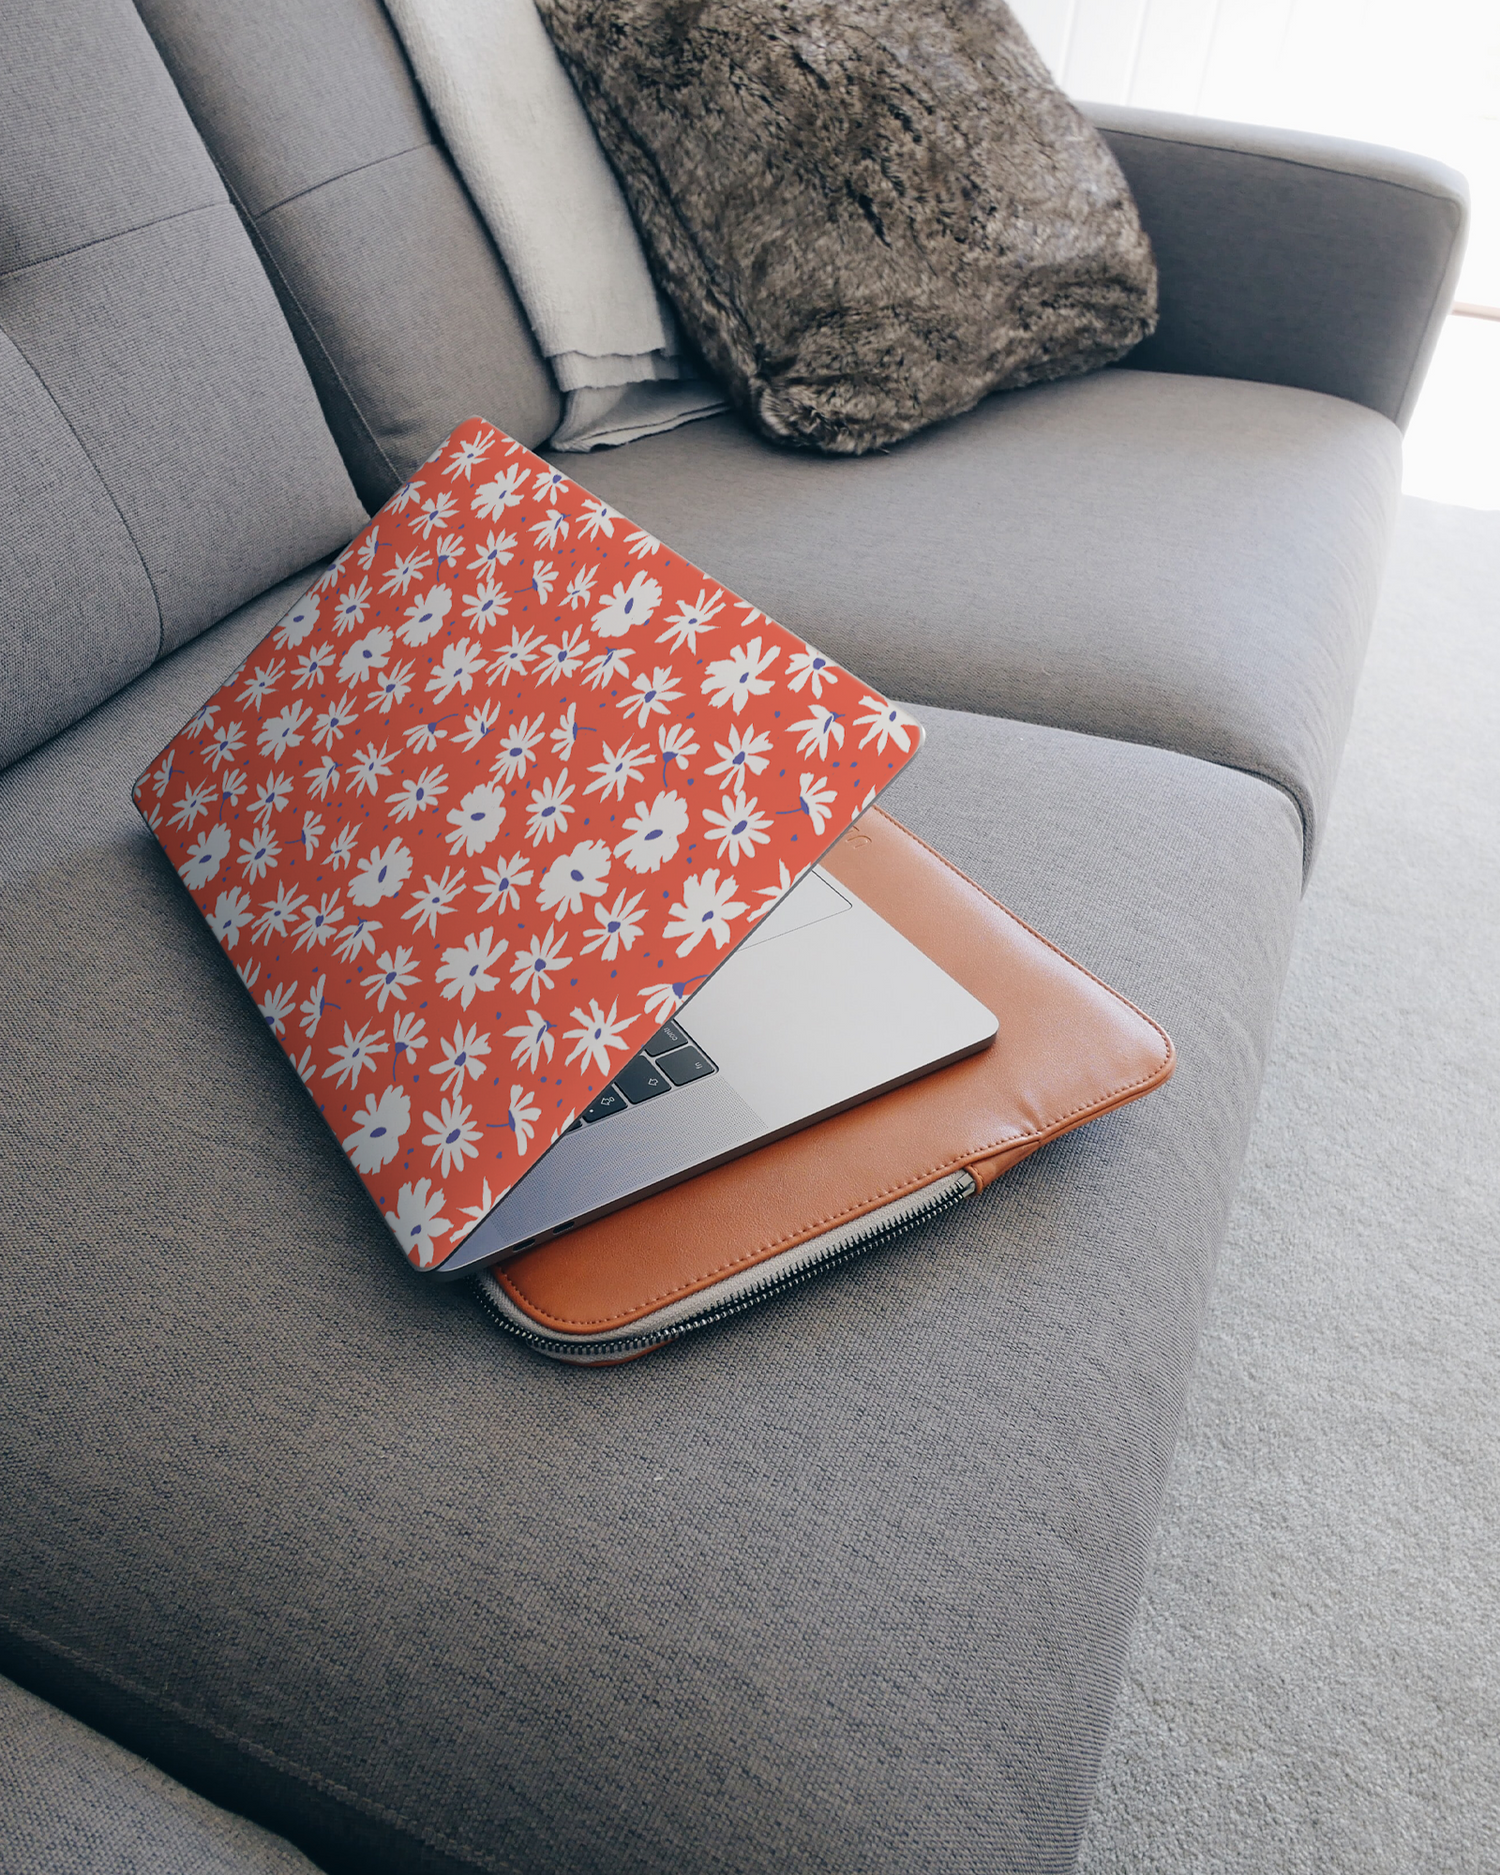 Retro Daisy Laptop Skin for 15 inch Apple MacBooks on a couch